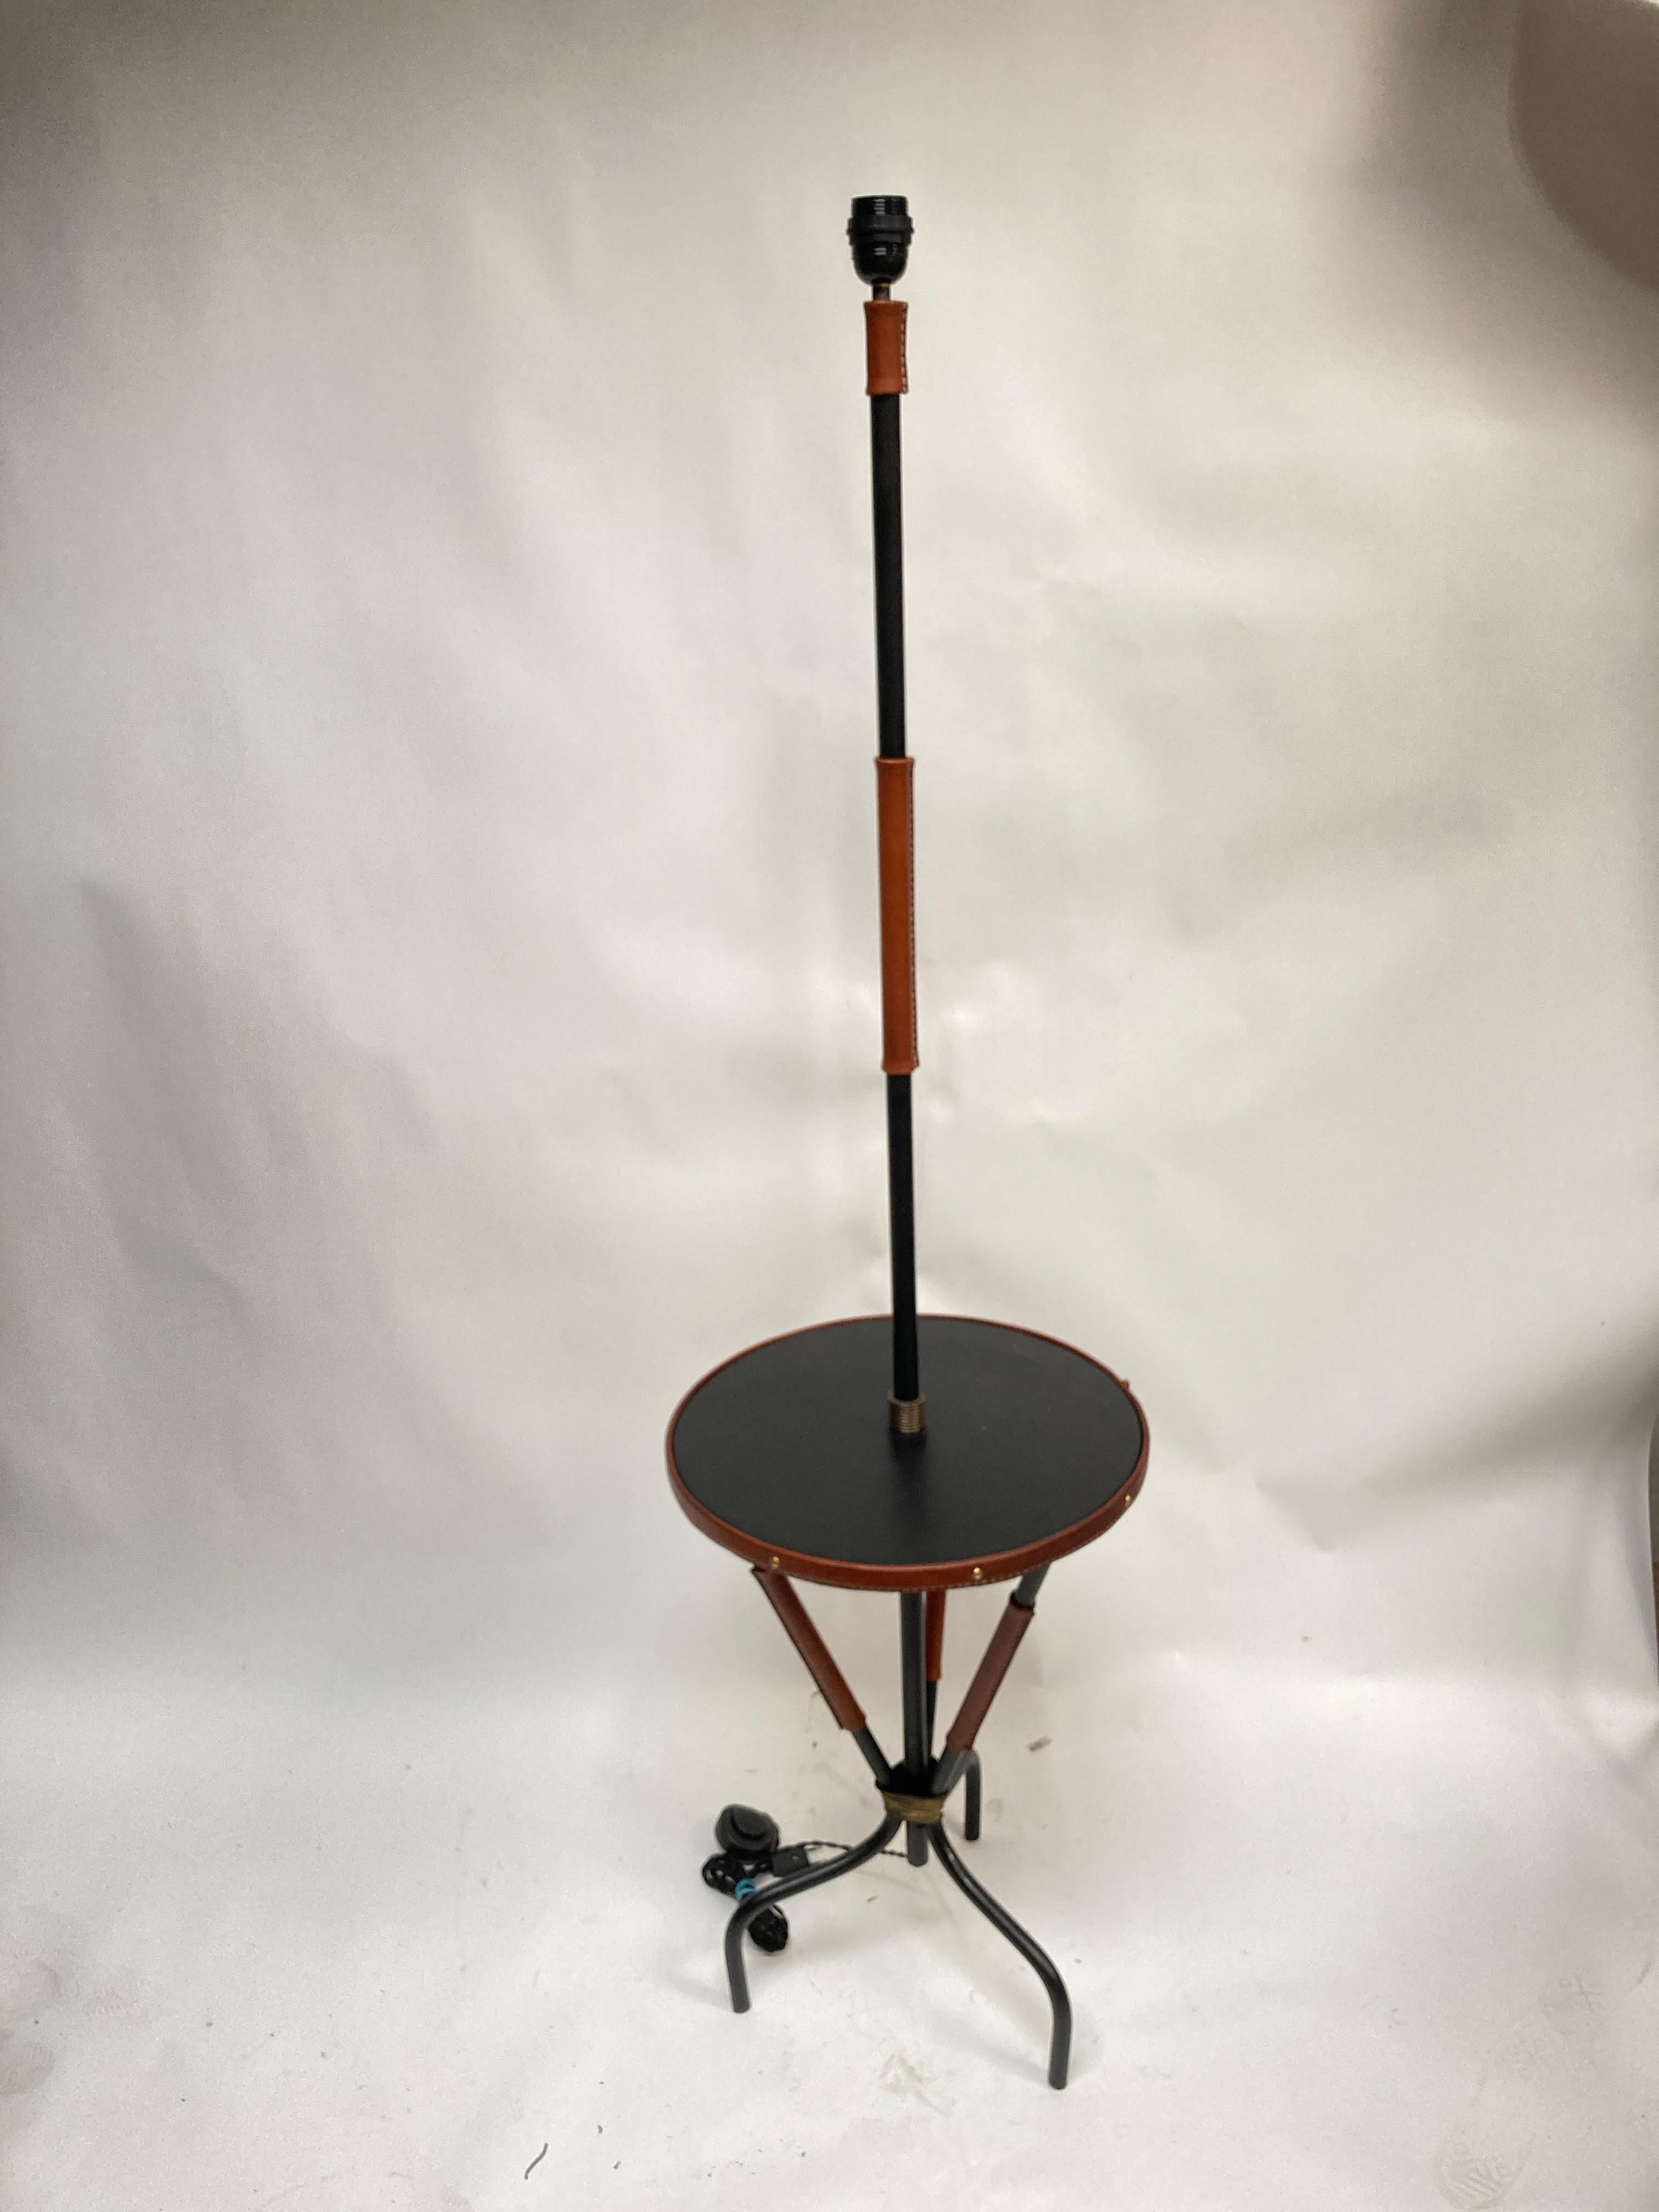 1950's Stitched Leather Floor lamp By Jacques Adnet
Dimensions given without shade
No shade included
